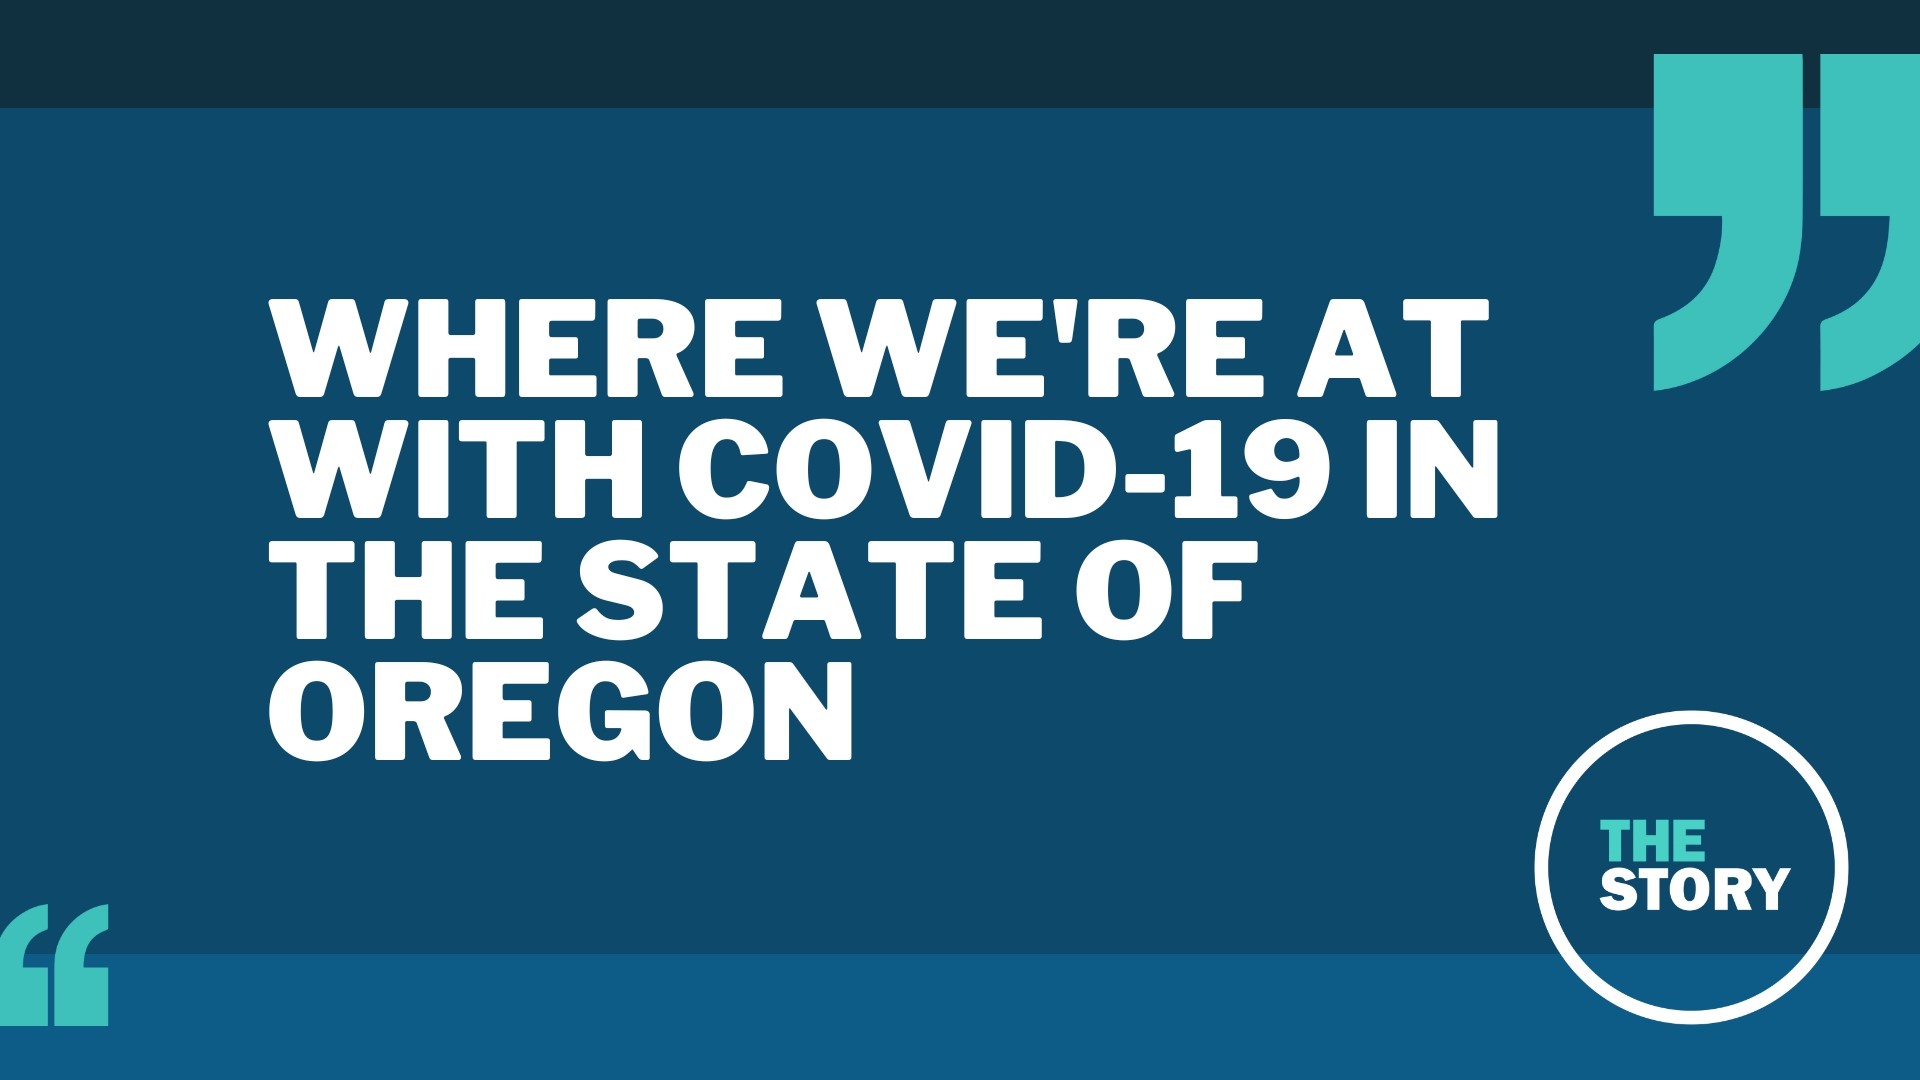 Hospitalizations for COVID-19 have flattened out, according to the CDC. Oregon is one of 14 states with some mask requirements in place for certain settings.